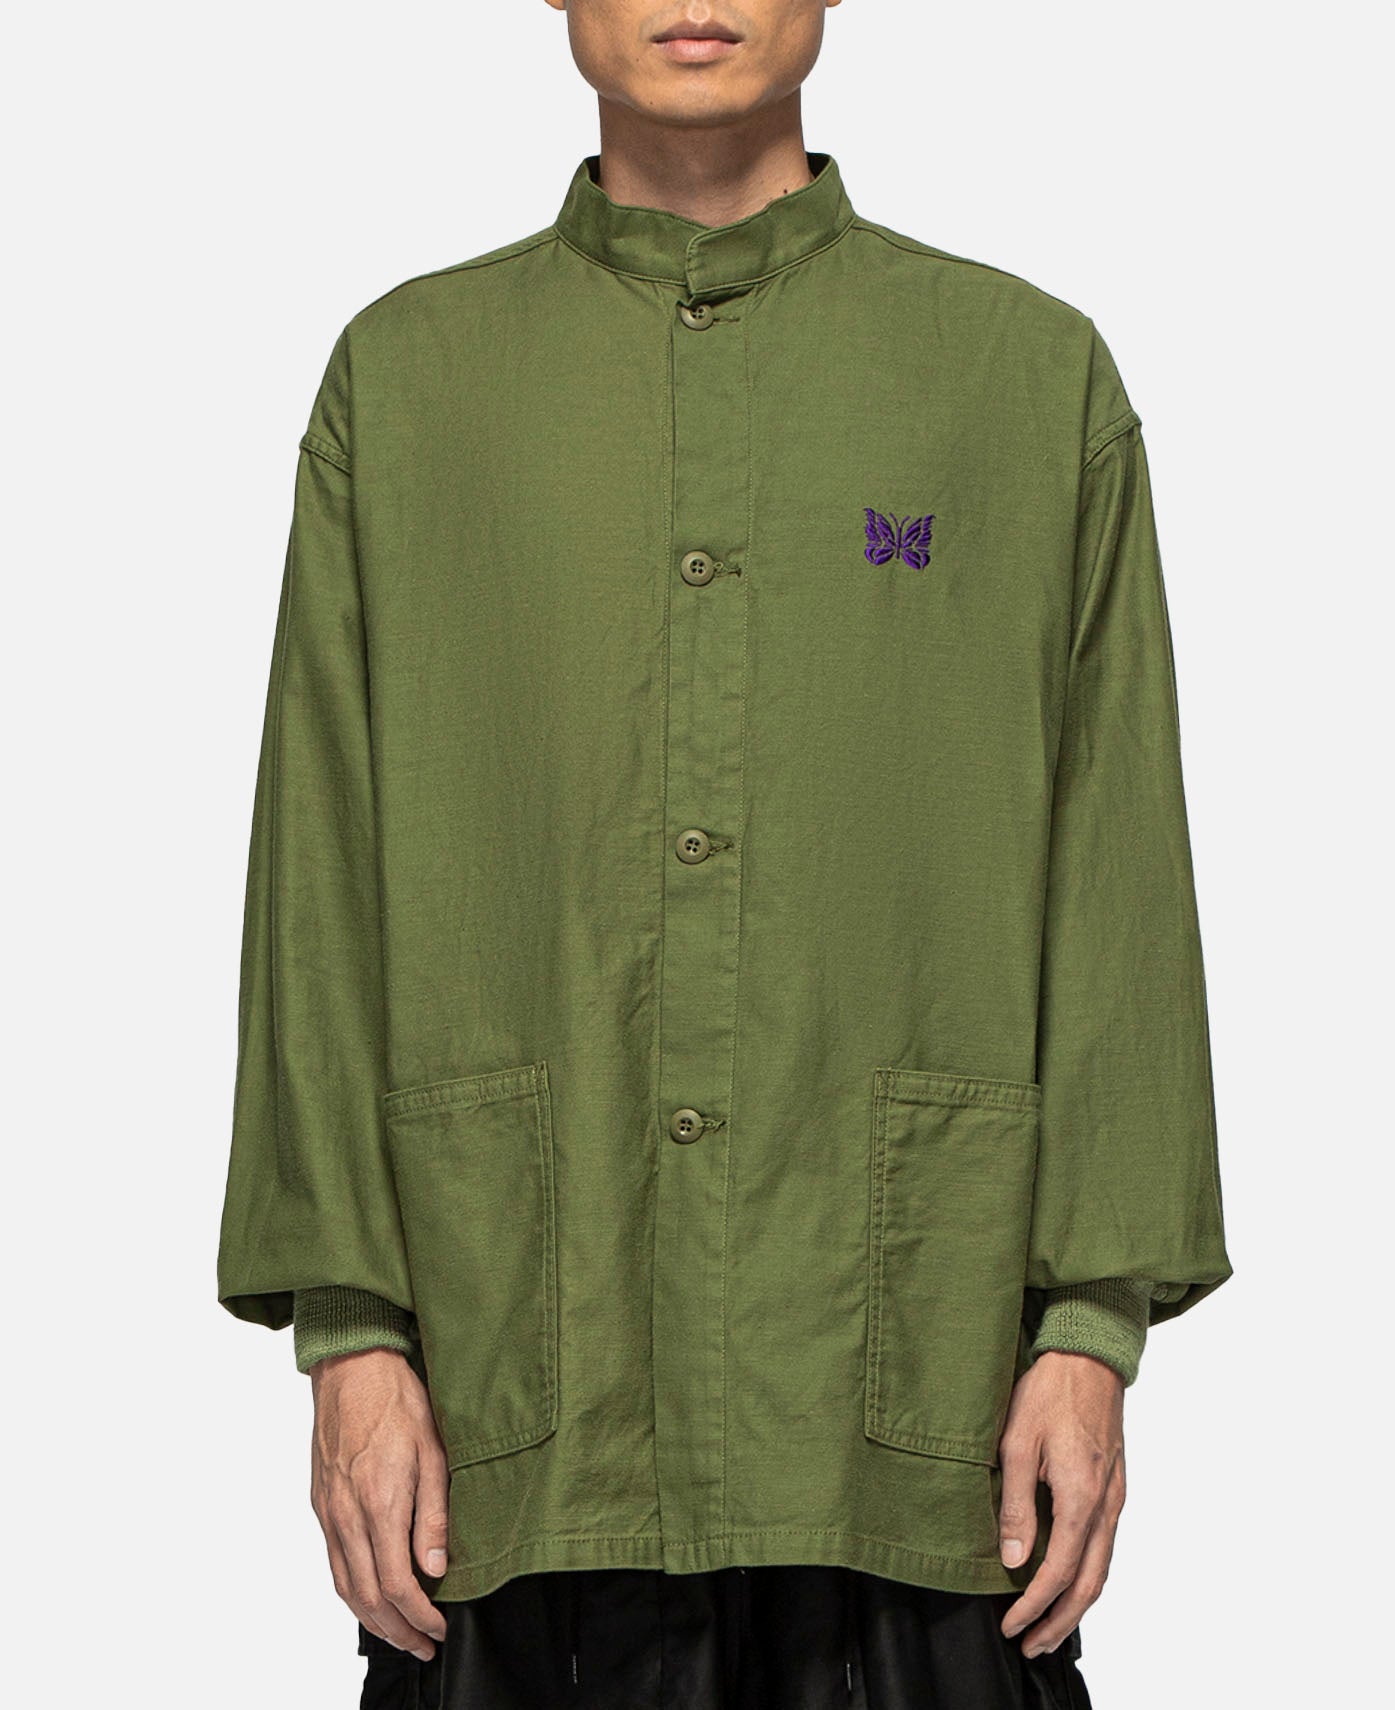 Needles - S.C. Army Back Sateen Shirt (Olive) – JUICESTORE